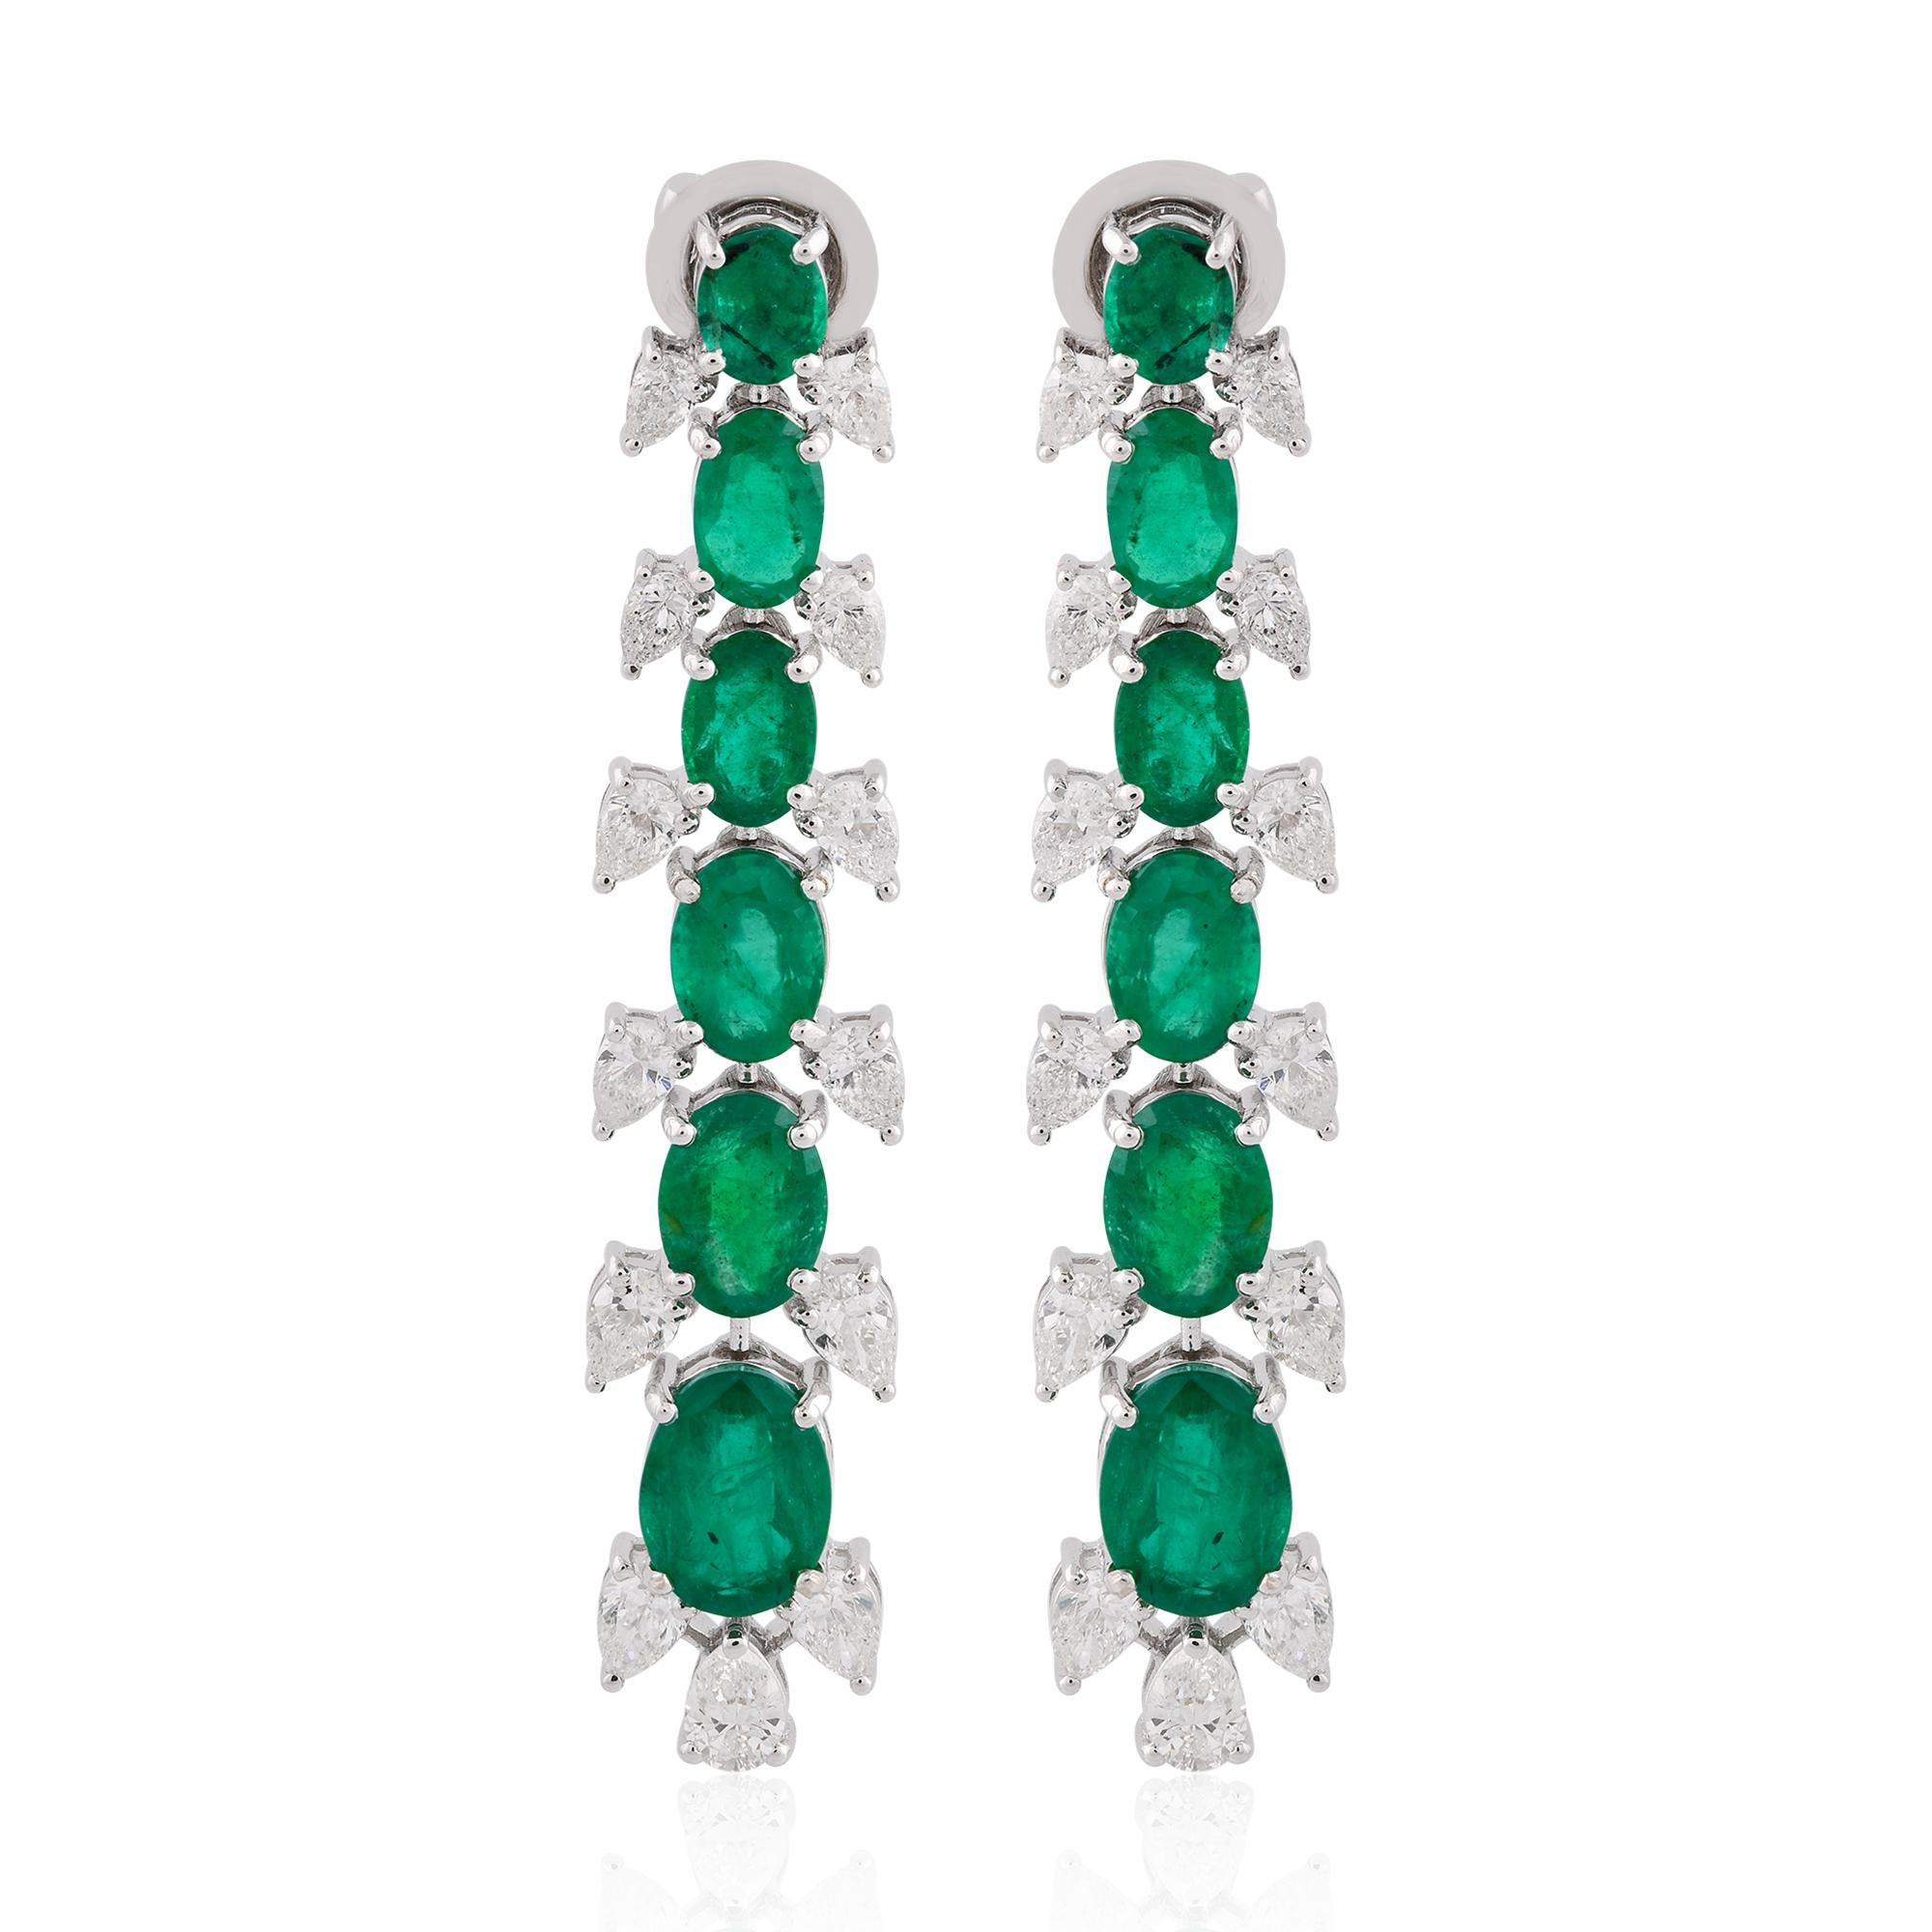 Item Code :- SEE-12397
Gross Wt. :- 11.34 gm
18k Solid White Gold Wt. :- 9.27 gm
Natural Diamond Wt. :- 2.70 Ct. ( AVERAGE DIAMOND CLARITY SI1-SI2 & COLOR H-I )
Zambian Emerald Wt. :- 7.65 Ct.
Earrings Size :- 50 mm approx.

✦